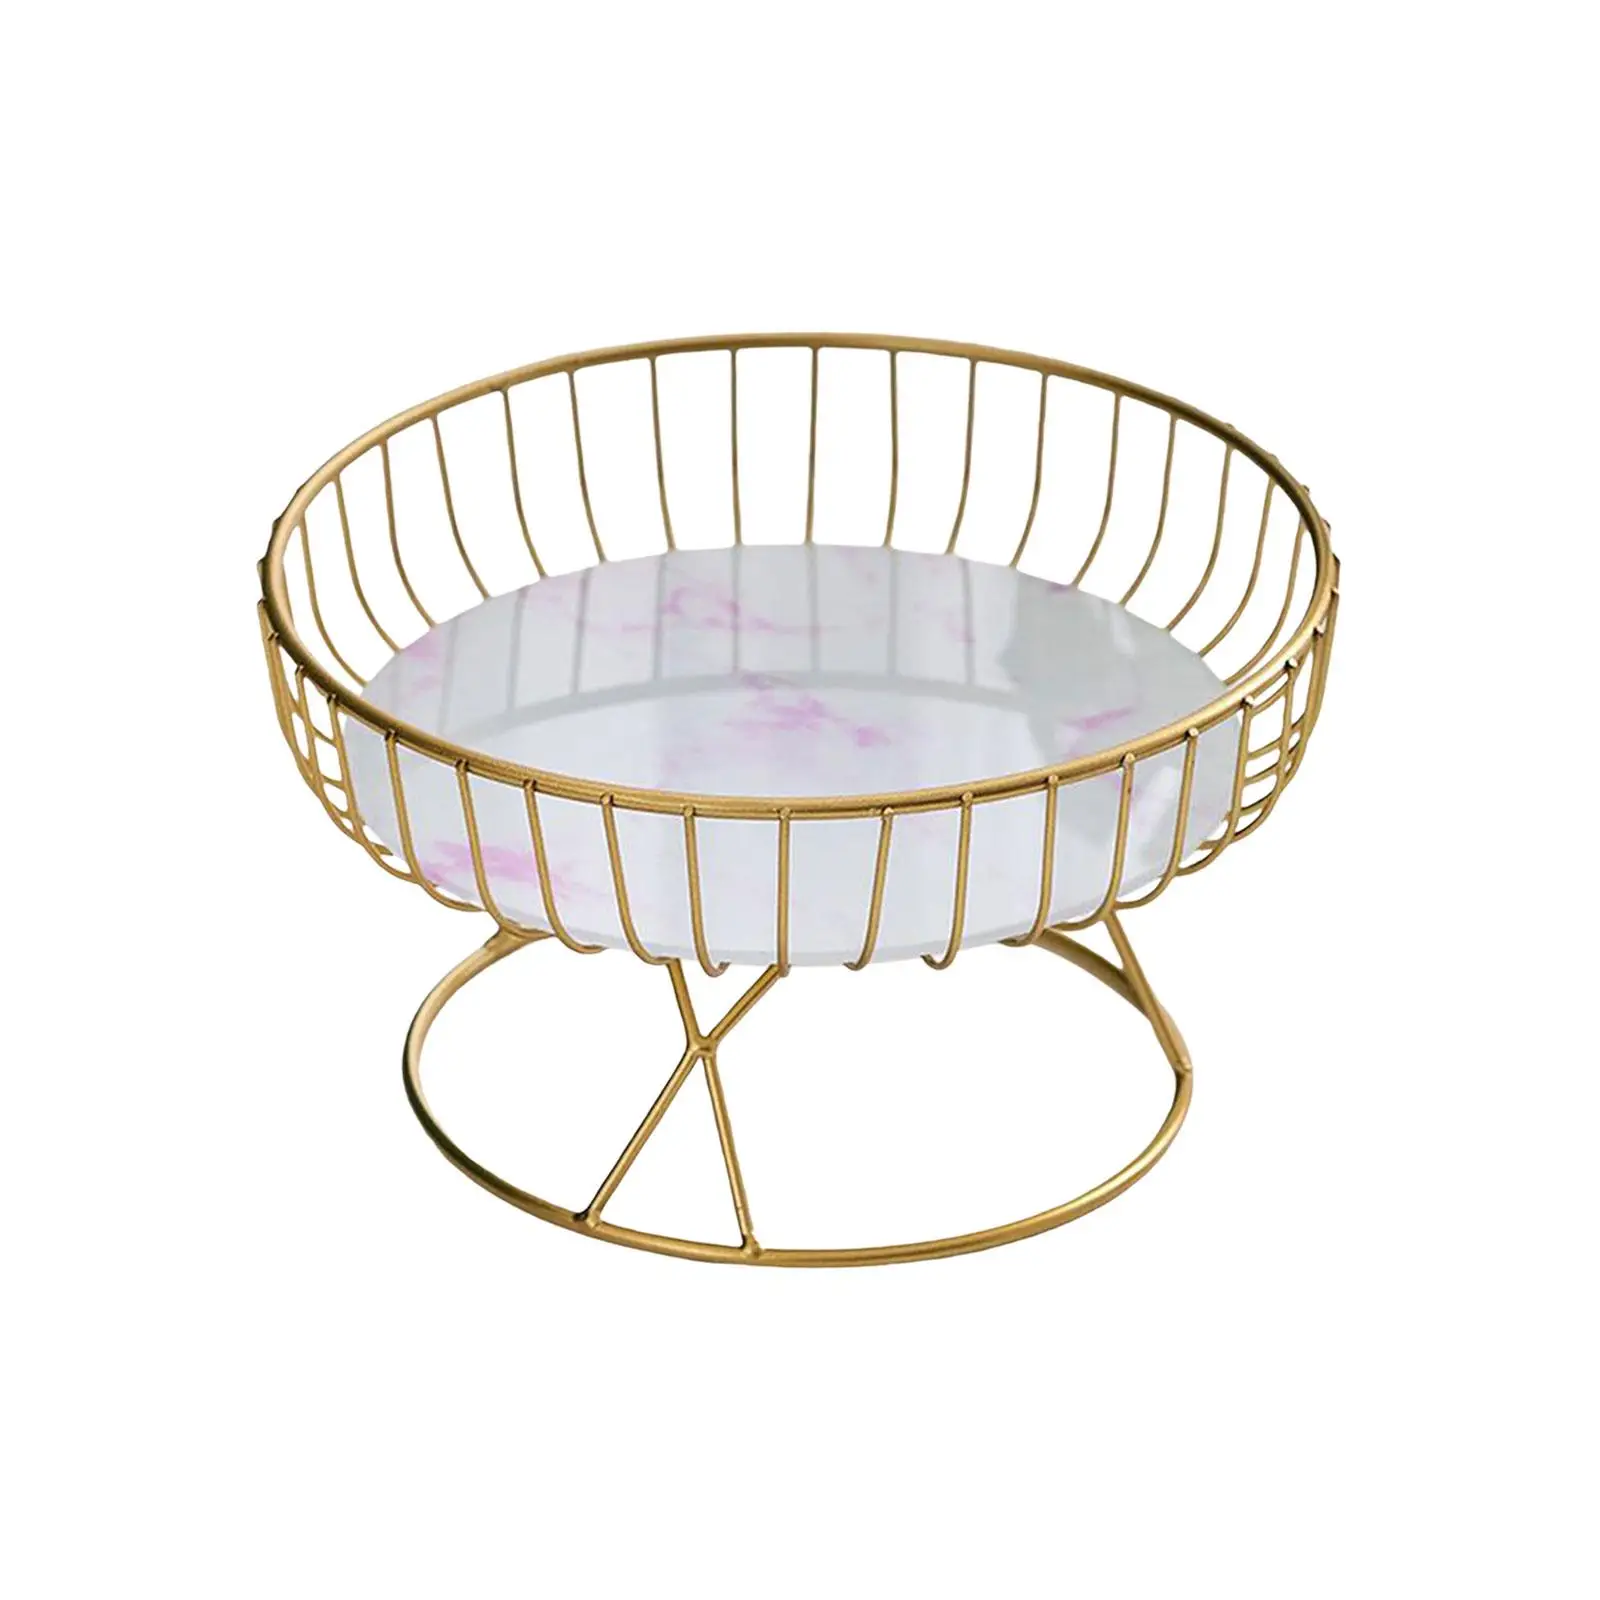 Metal Wire Fruit Bowl Fruit Holder Fruit Tray Cakes Holder Fruit Basket for Kitchen Countertop Outdoor Parties Cabinet Home